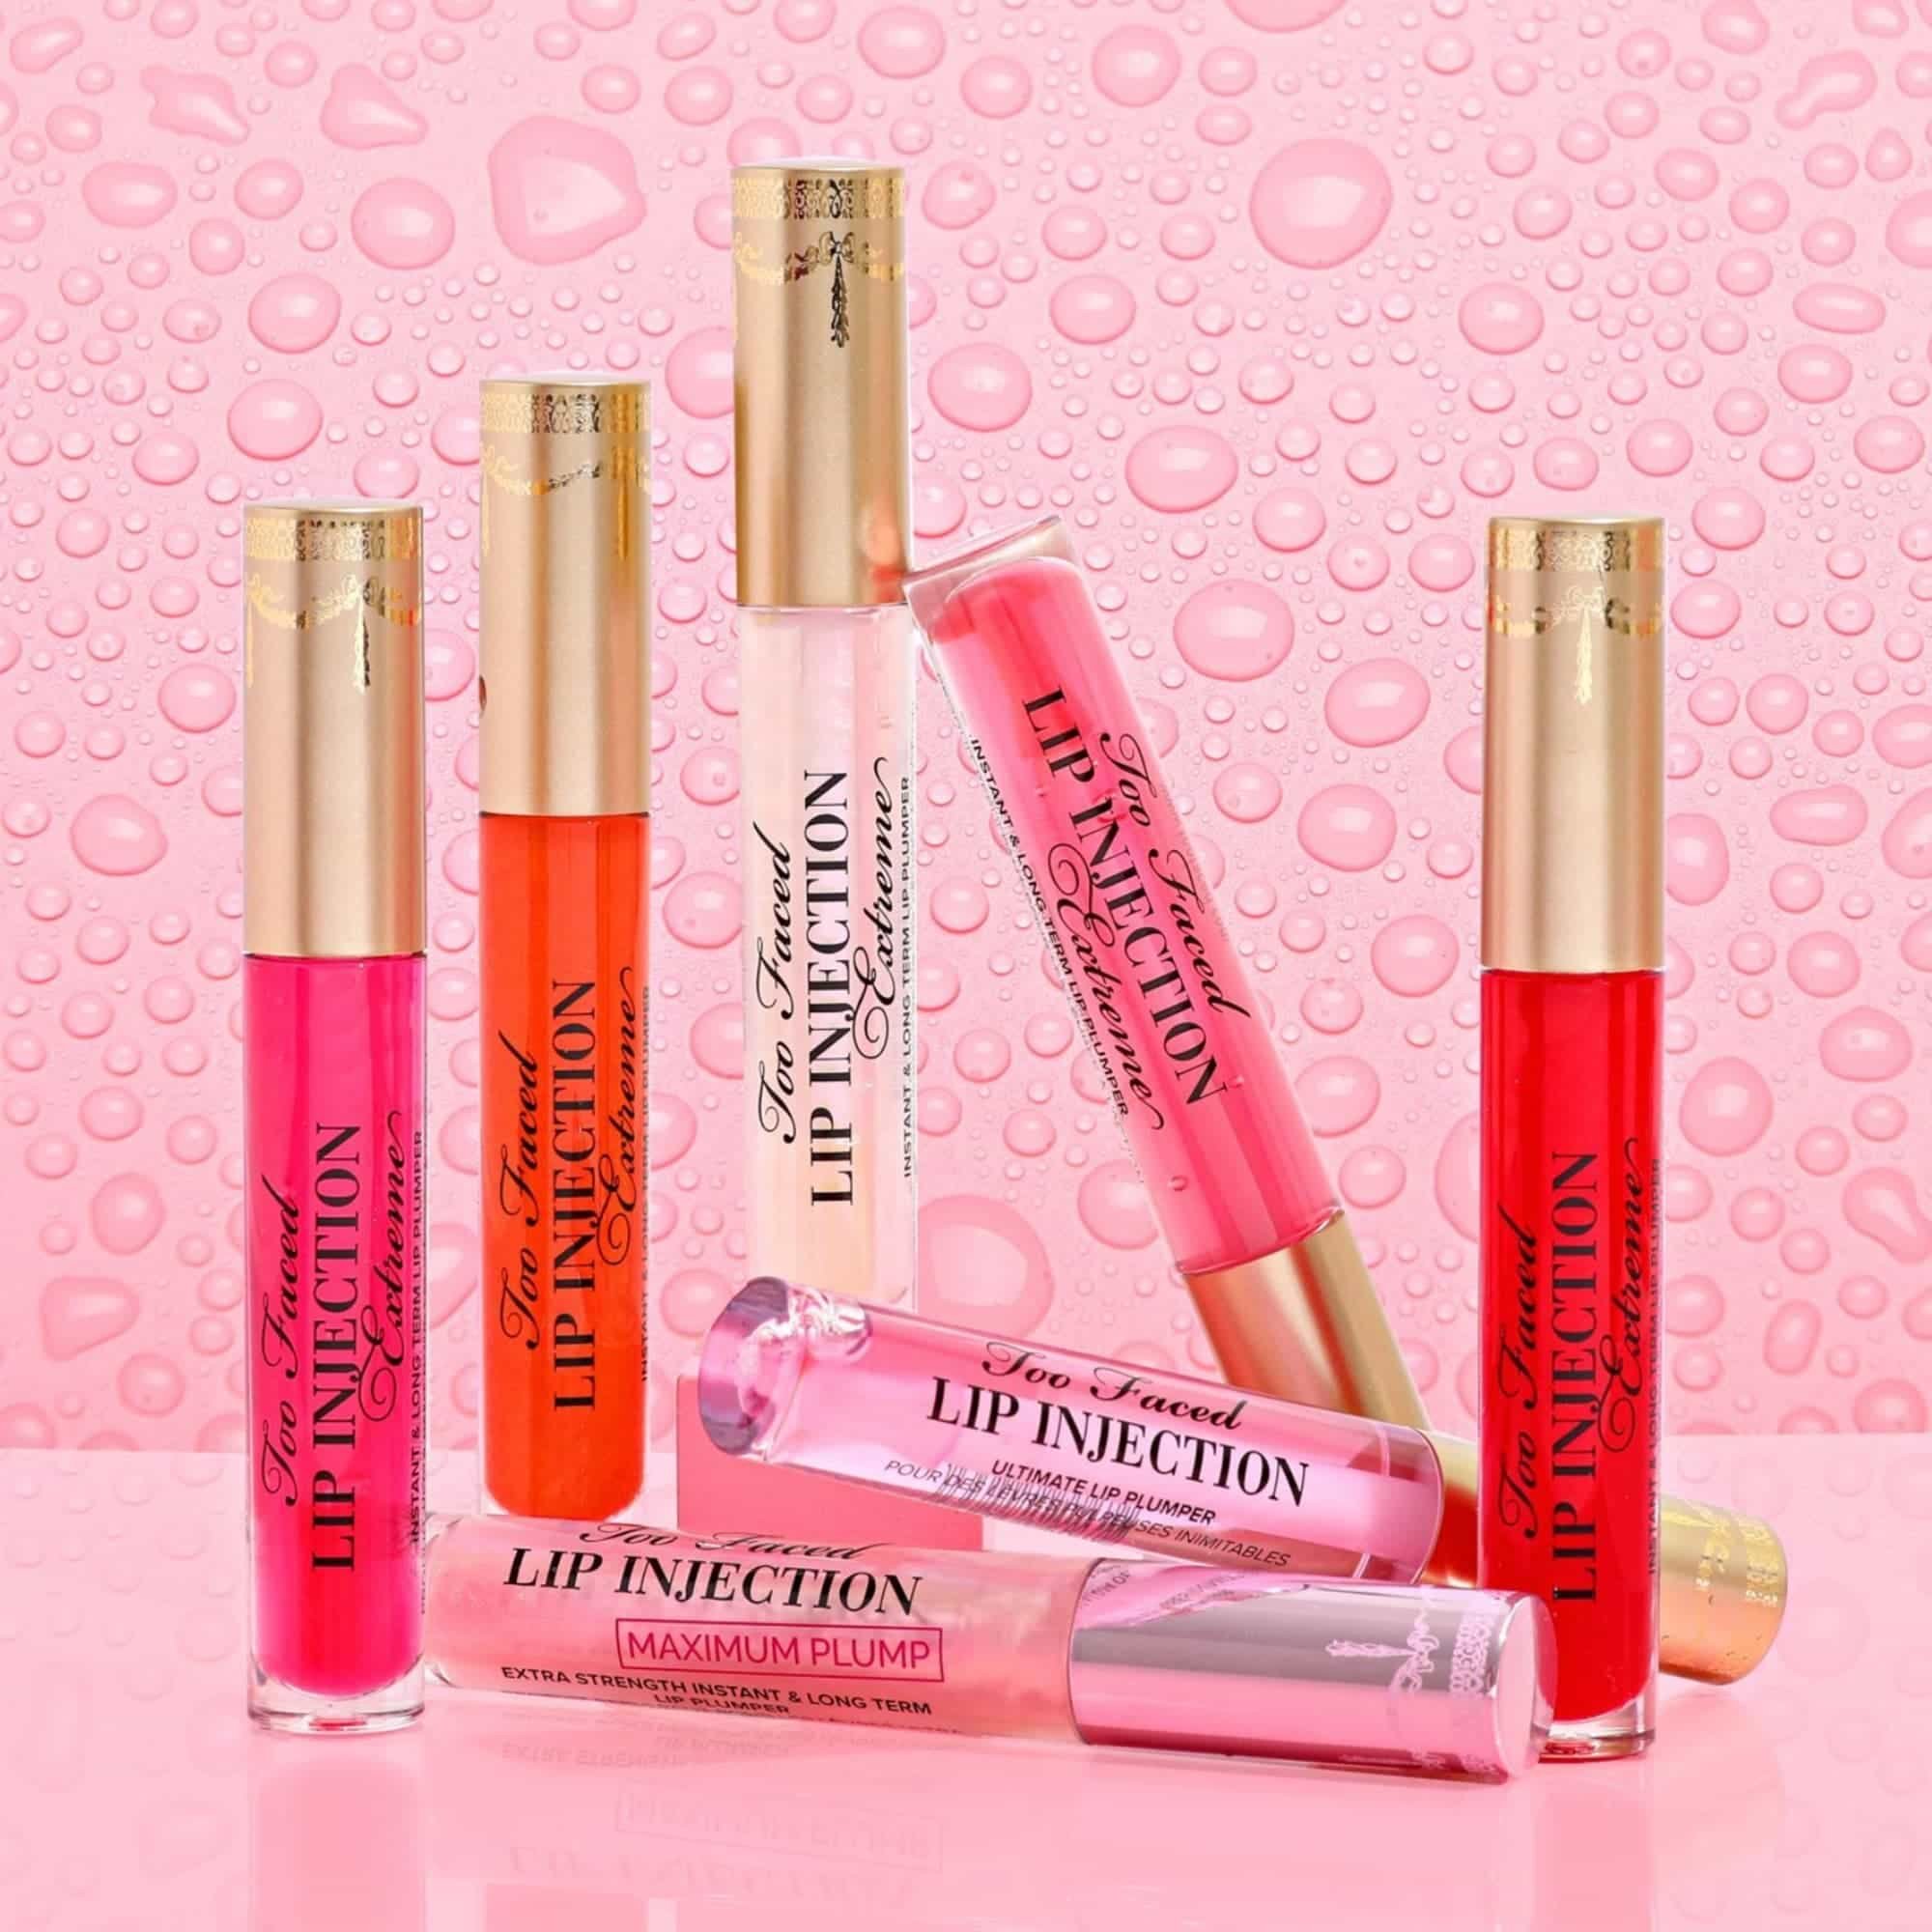 Too Faced Lip Injection Extreme Lip Plumper is the best overall lip plumper we’d suggest. Photos: Handout